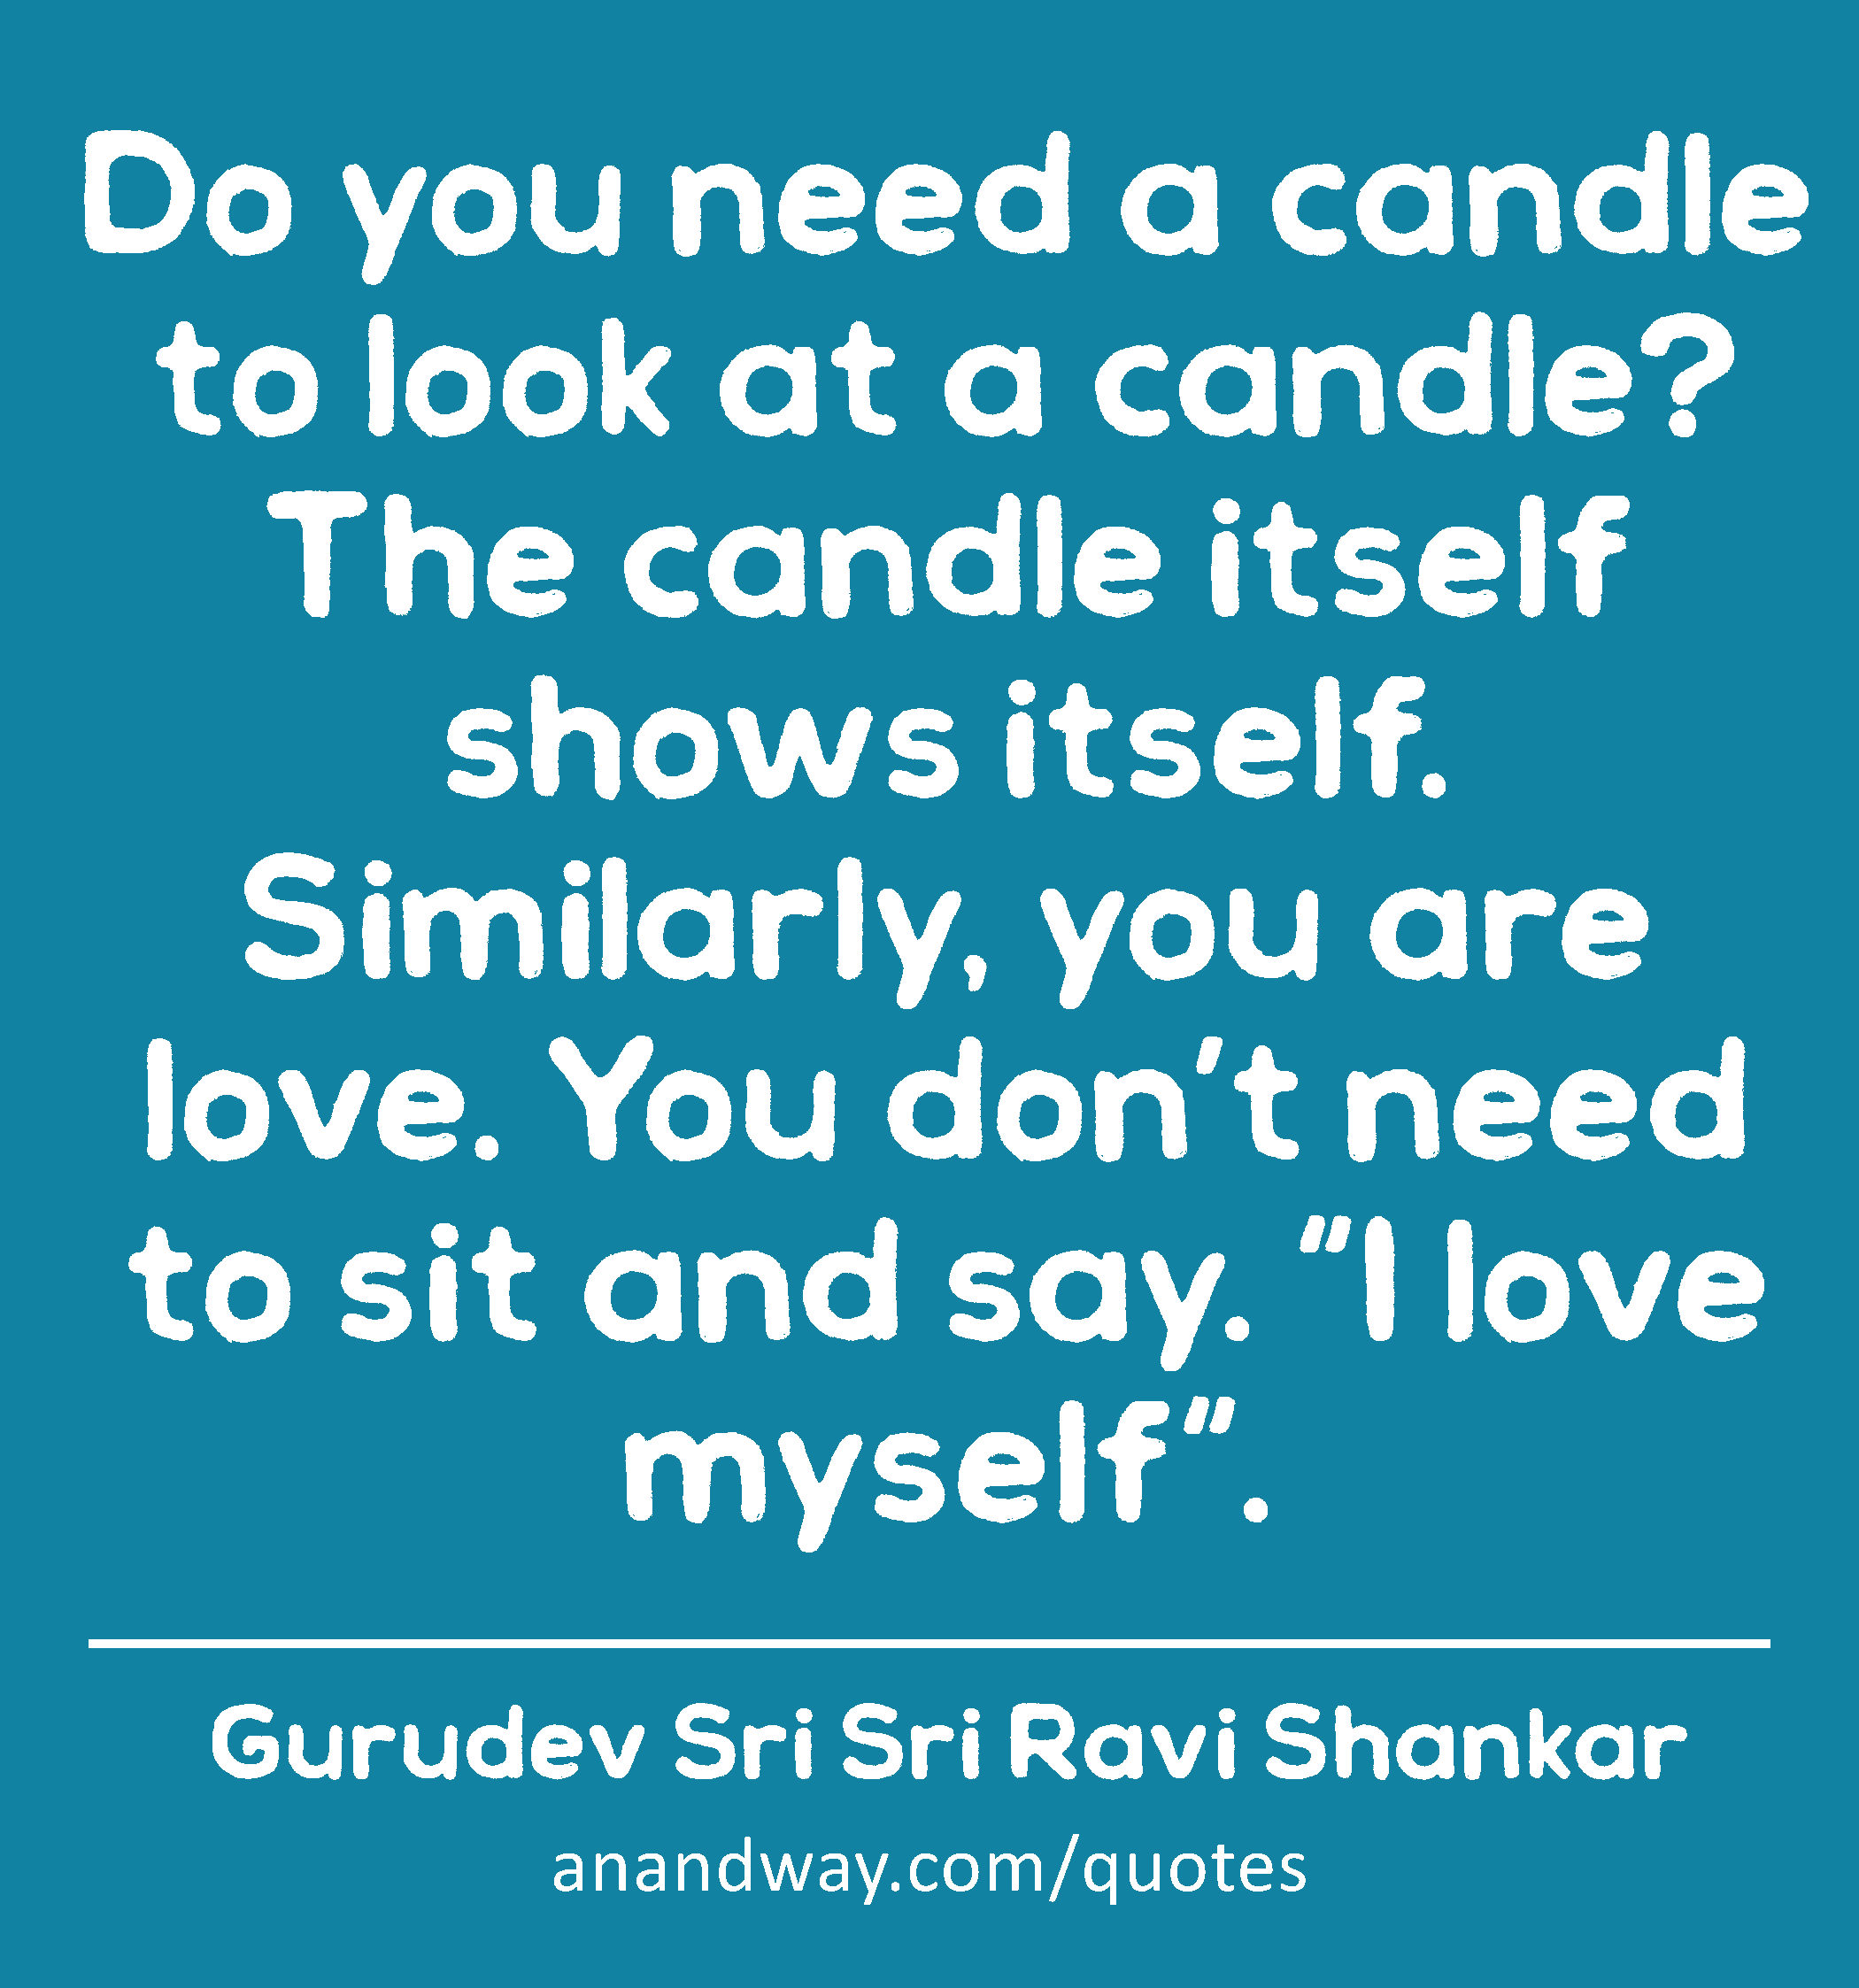 Do you need a candle to look at a candle? The candle itself shows itself. Similarly, you are love.
 -Gurudev Sri Sri Ravi Shankar